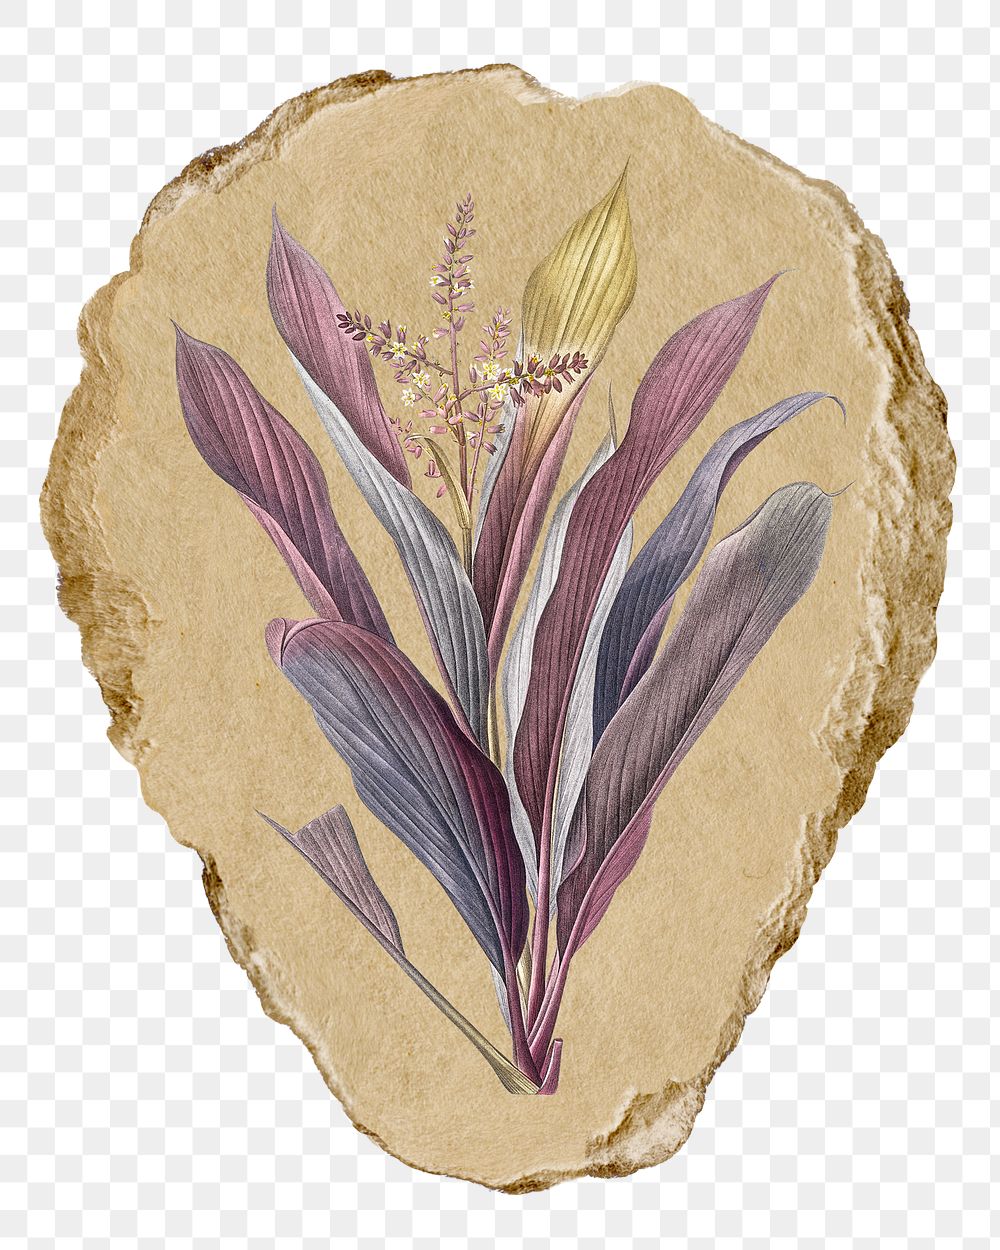 Png Cordyline fruticosa sticker, Redoute's vintage illustration on ripped paper, transparent background